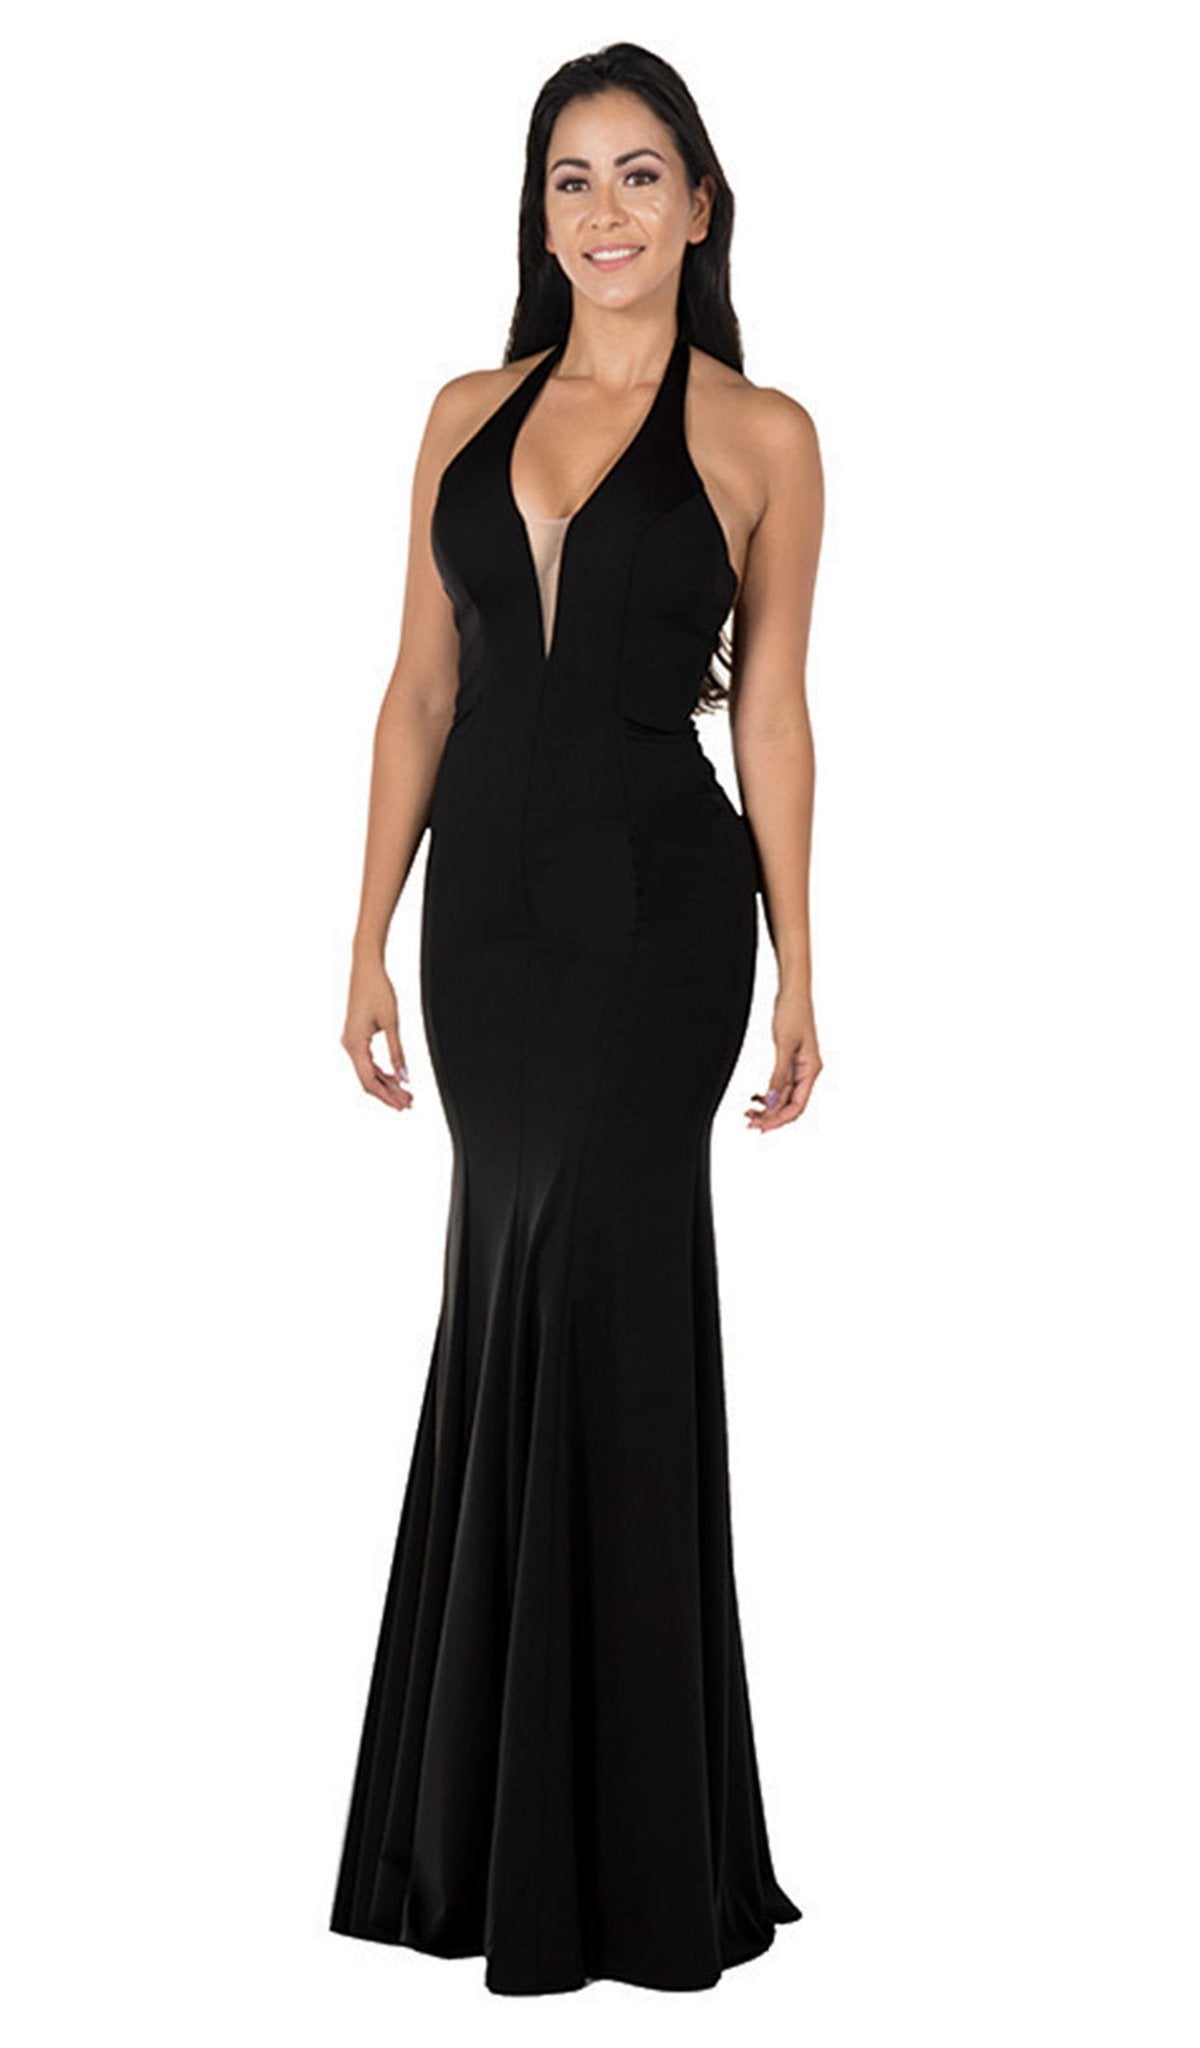 Image of Poly USA - 8262 Deep V Neckline Halter Top Mermaid Evening Gown